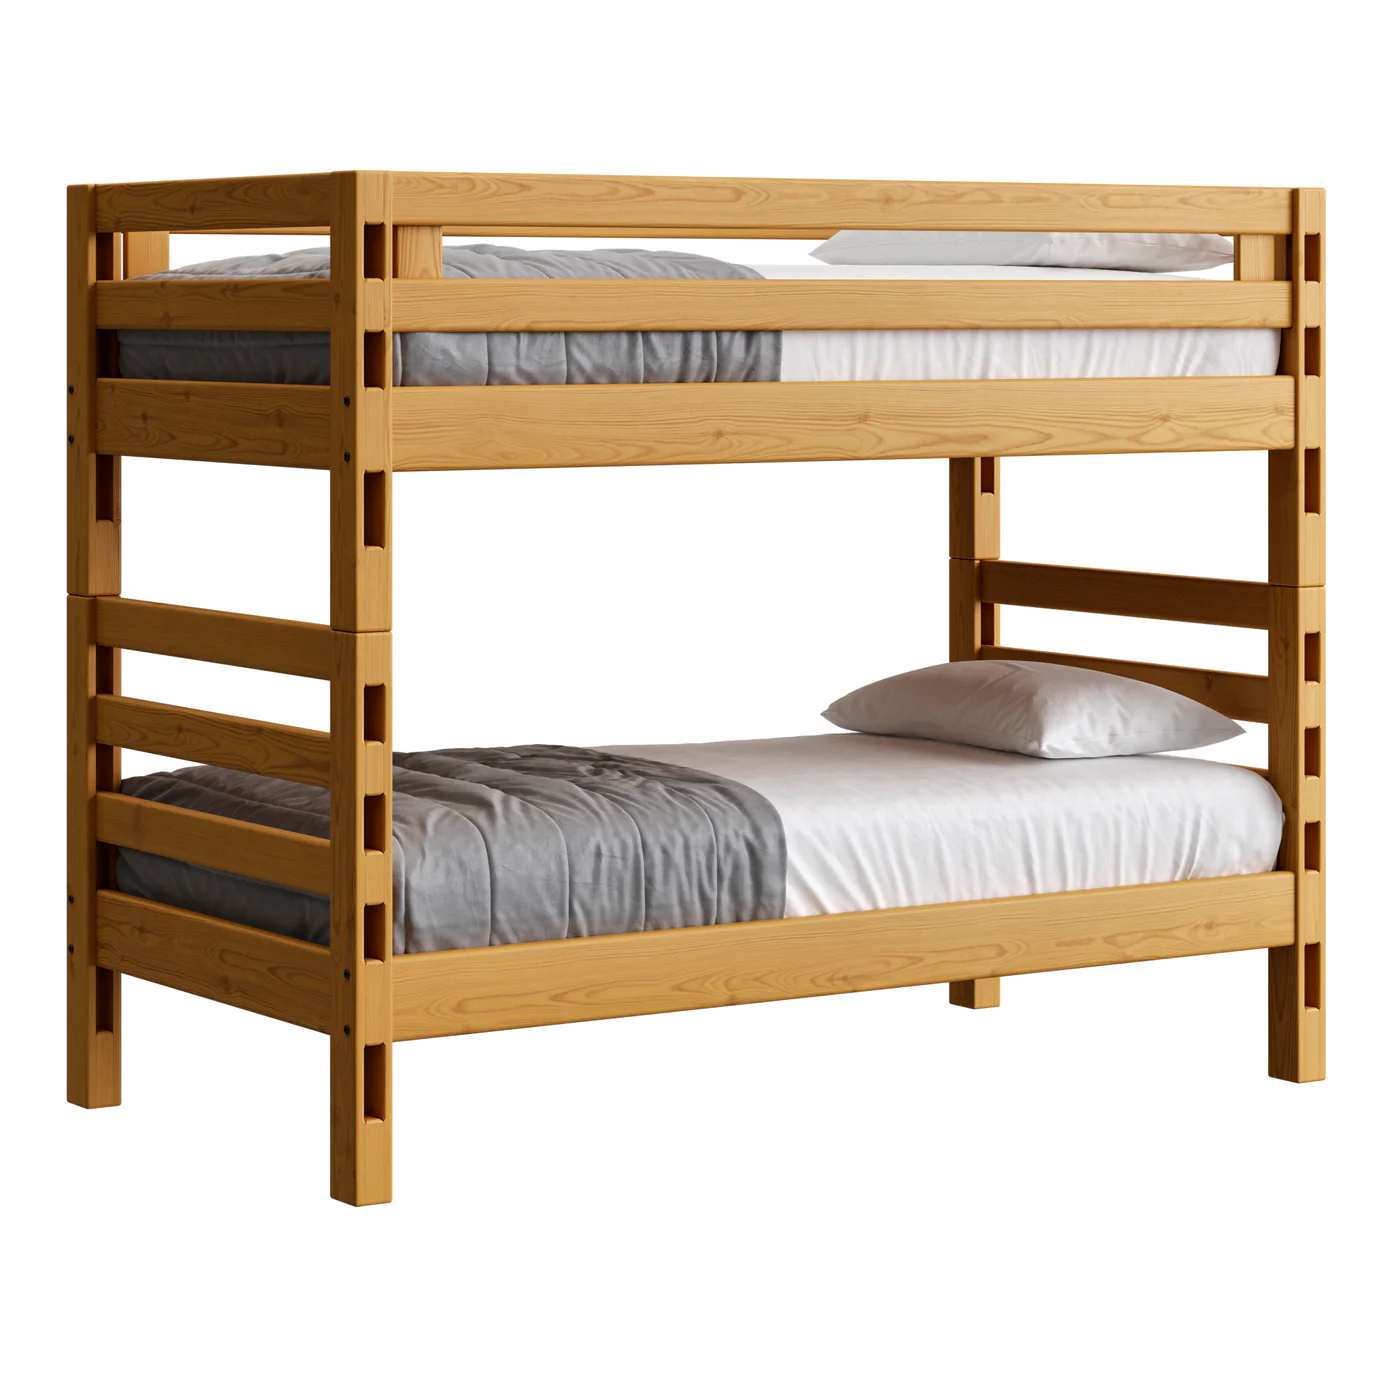 https://lfurniture.ca/wp-content/uploads/2023/07/A4005-bunk-bed-ladder-end-65-inch-high-twin-over-twin-size-classic-finish_1400x.jpg.webp